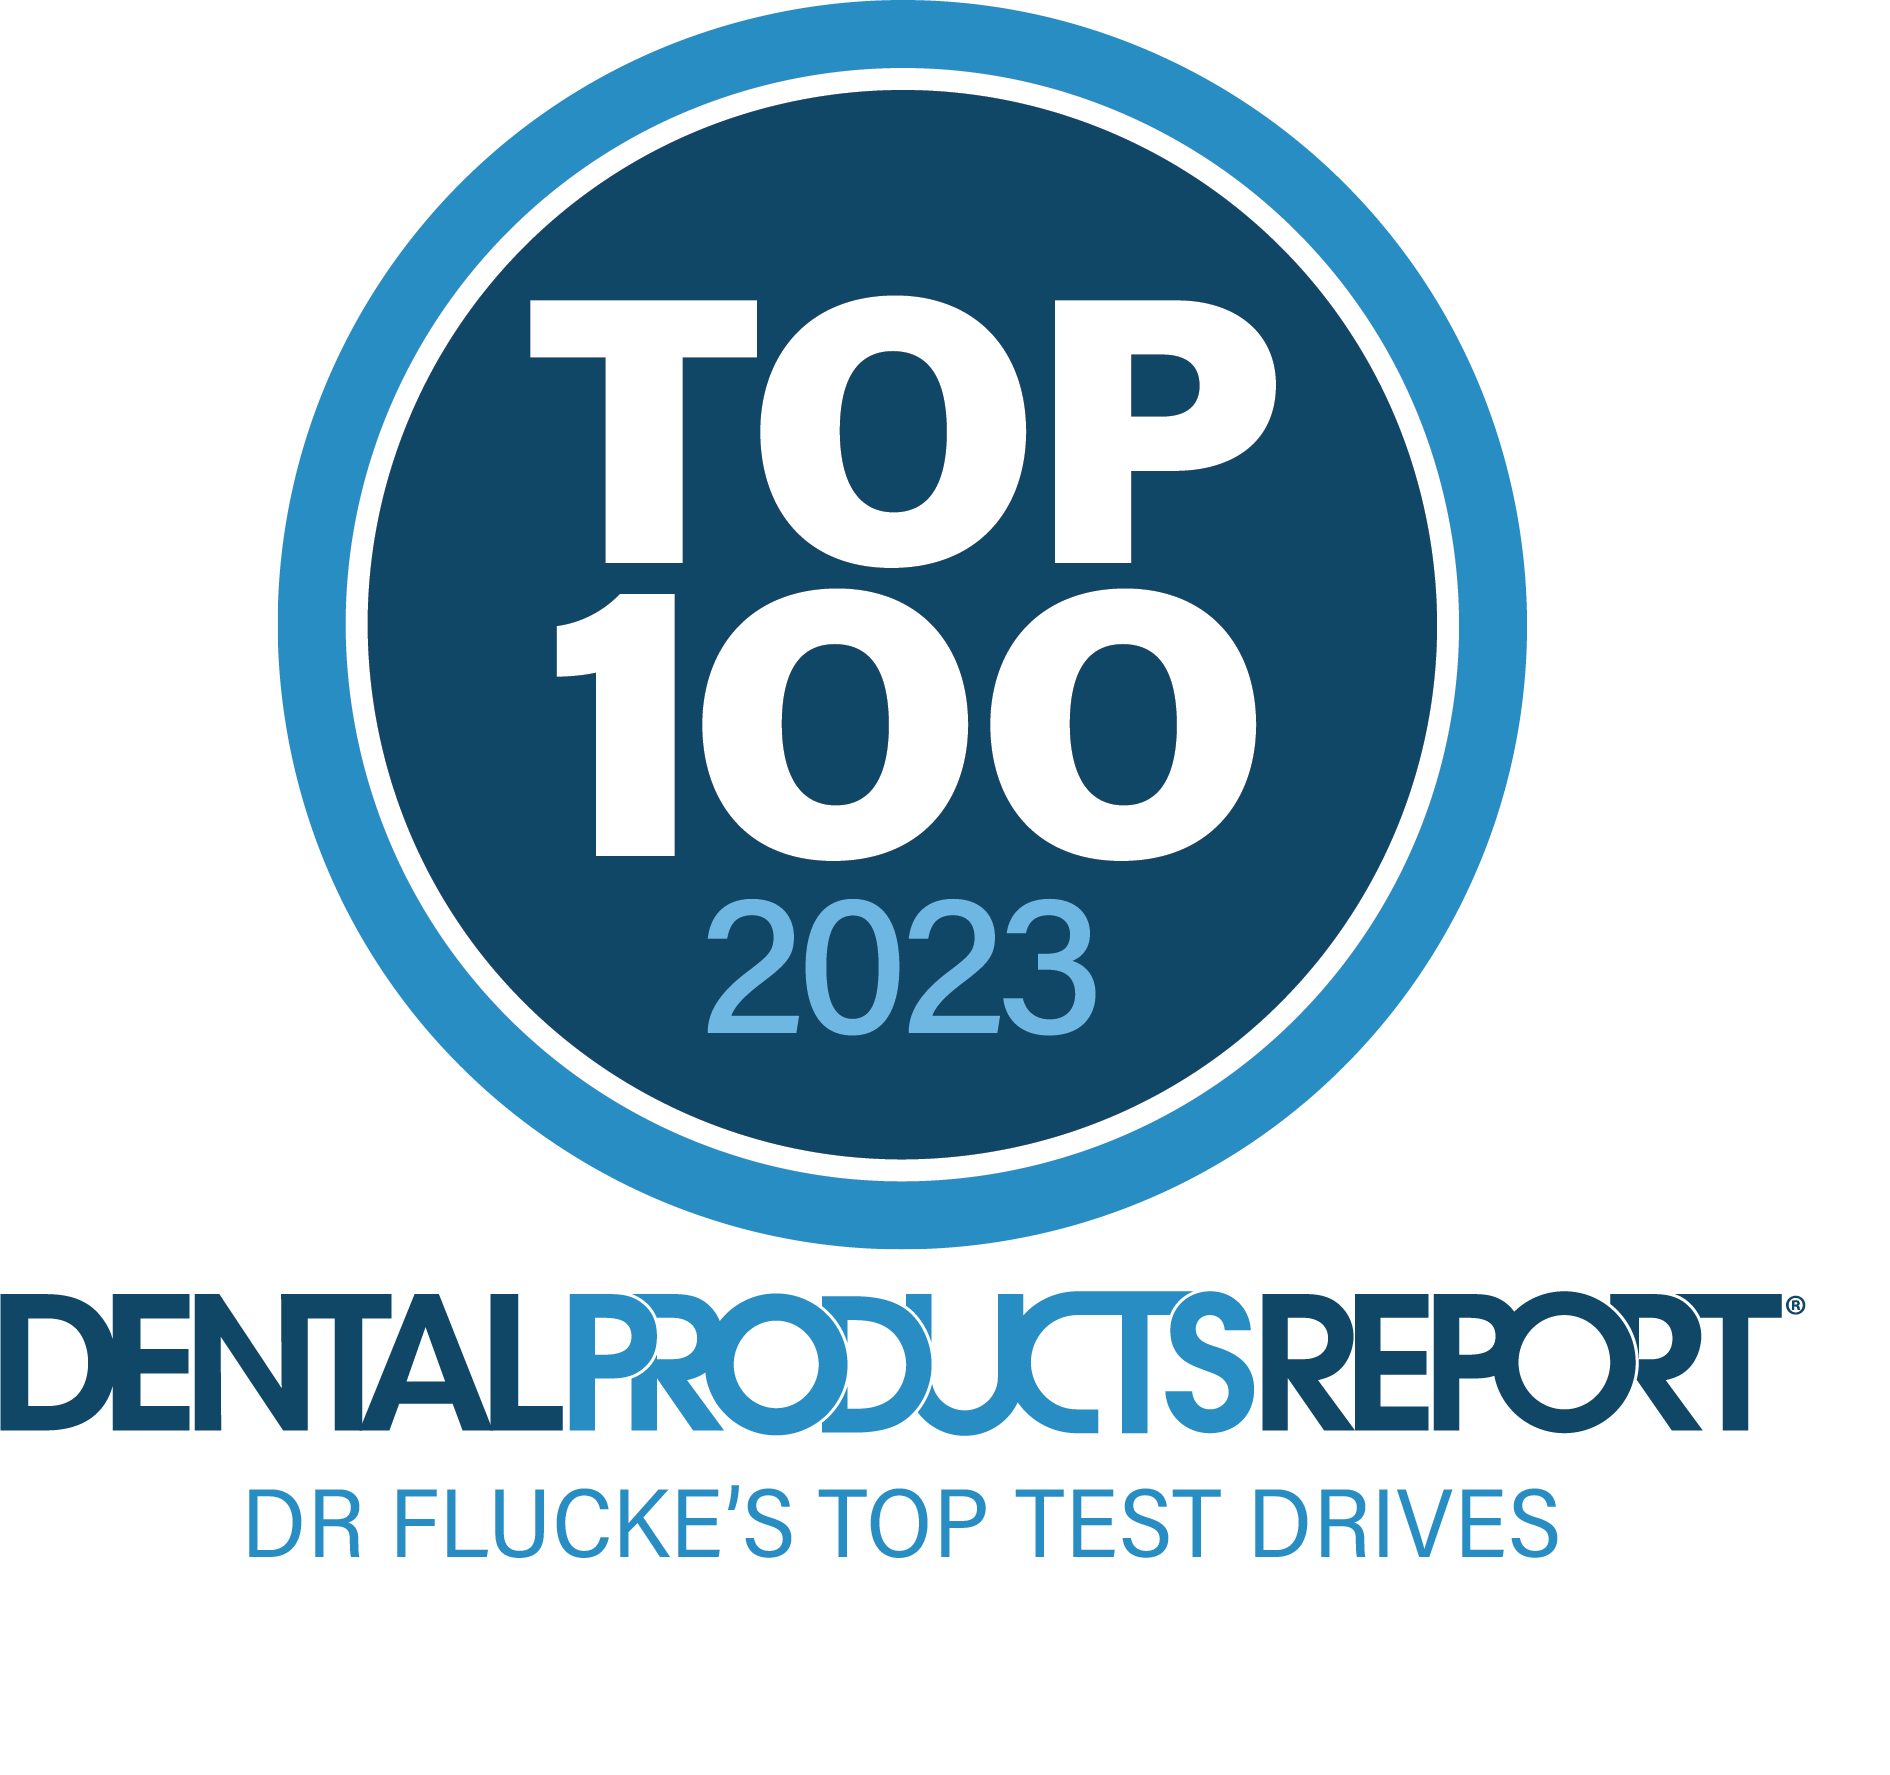 DPR Top 100: Dr Flucke's Top 5 Test Drives of 2023